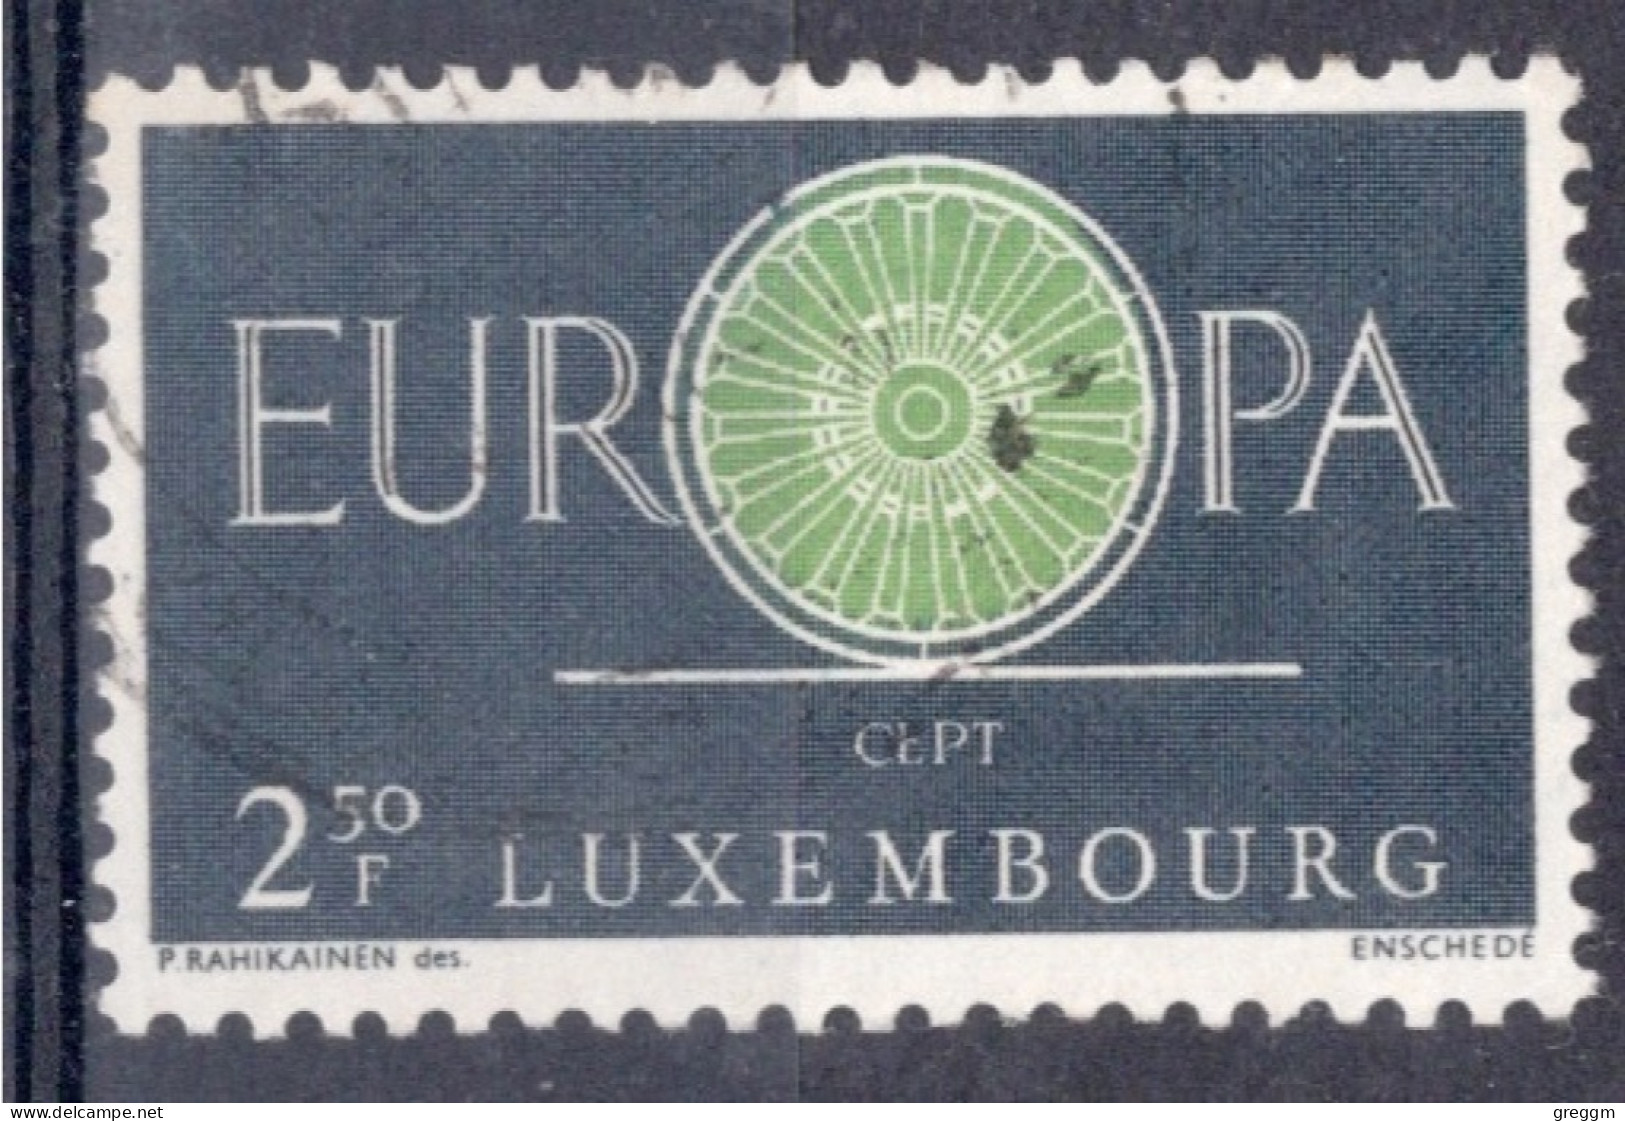 Luxembourg 1960  Single Stamp Issued To Celebrate EUROPA In Fine Used - Gebraucht